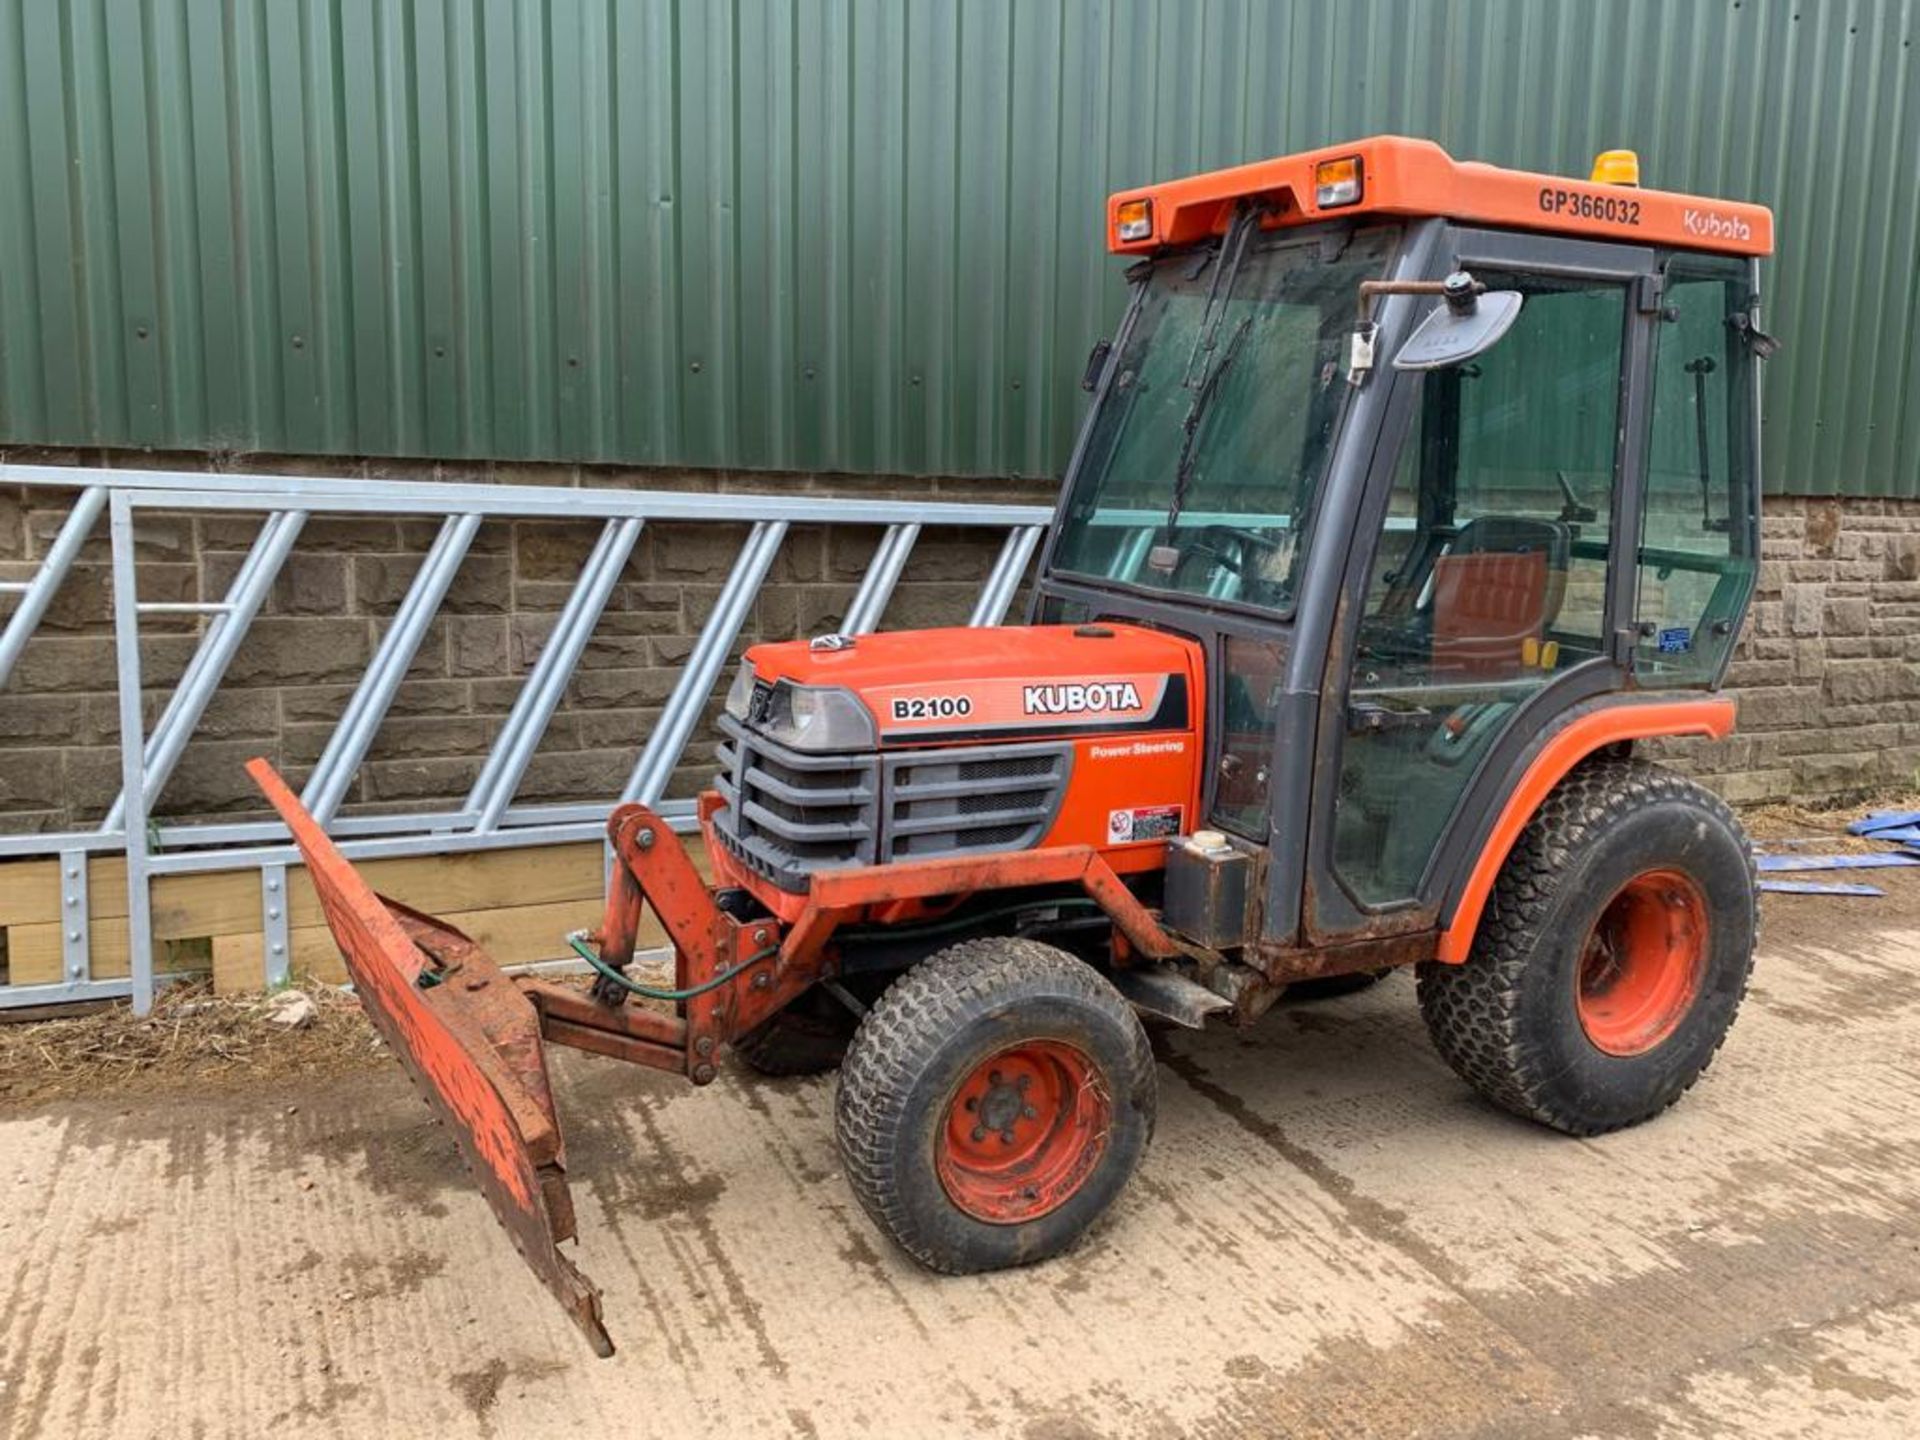 2000/X REG KUBOTA B2100 COMPACT TRACTOR WITH FULL GLASS CAB C/W PLOUGH ATTACHMENT *PLUS VAT* - Image 5 of 11